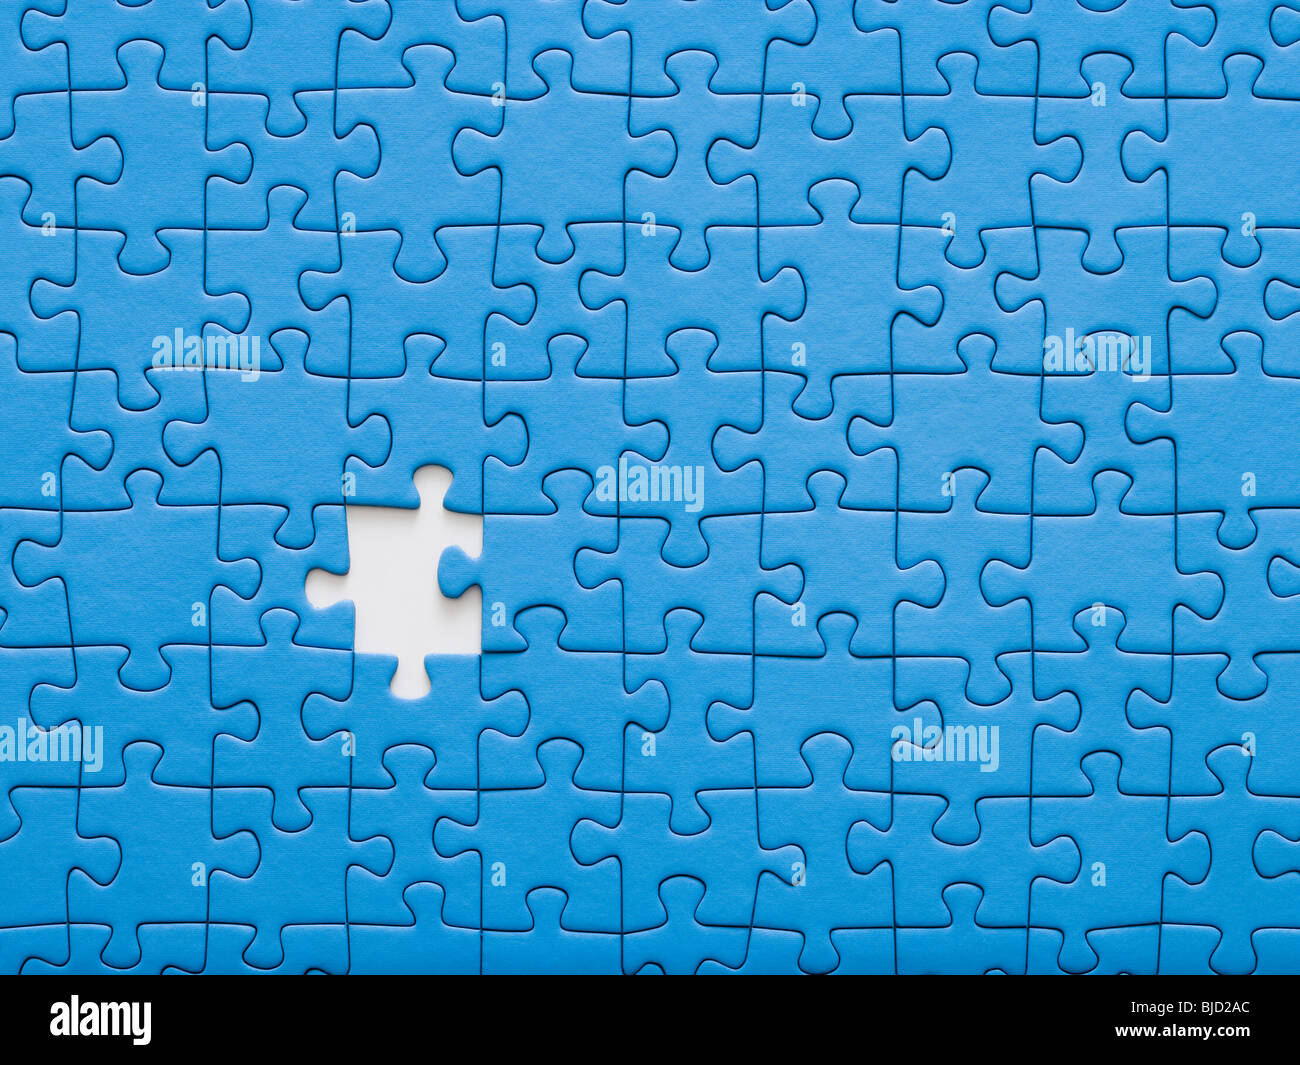 Jigsaw puzzle with a missing piece. Stock Photo